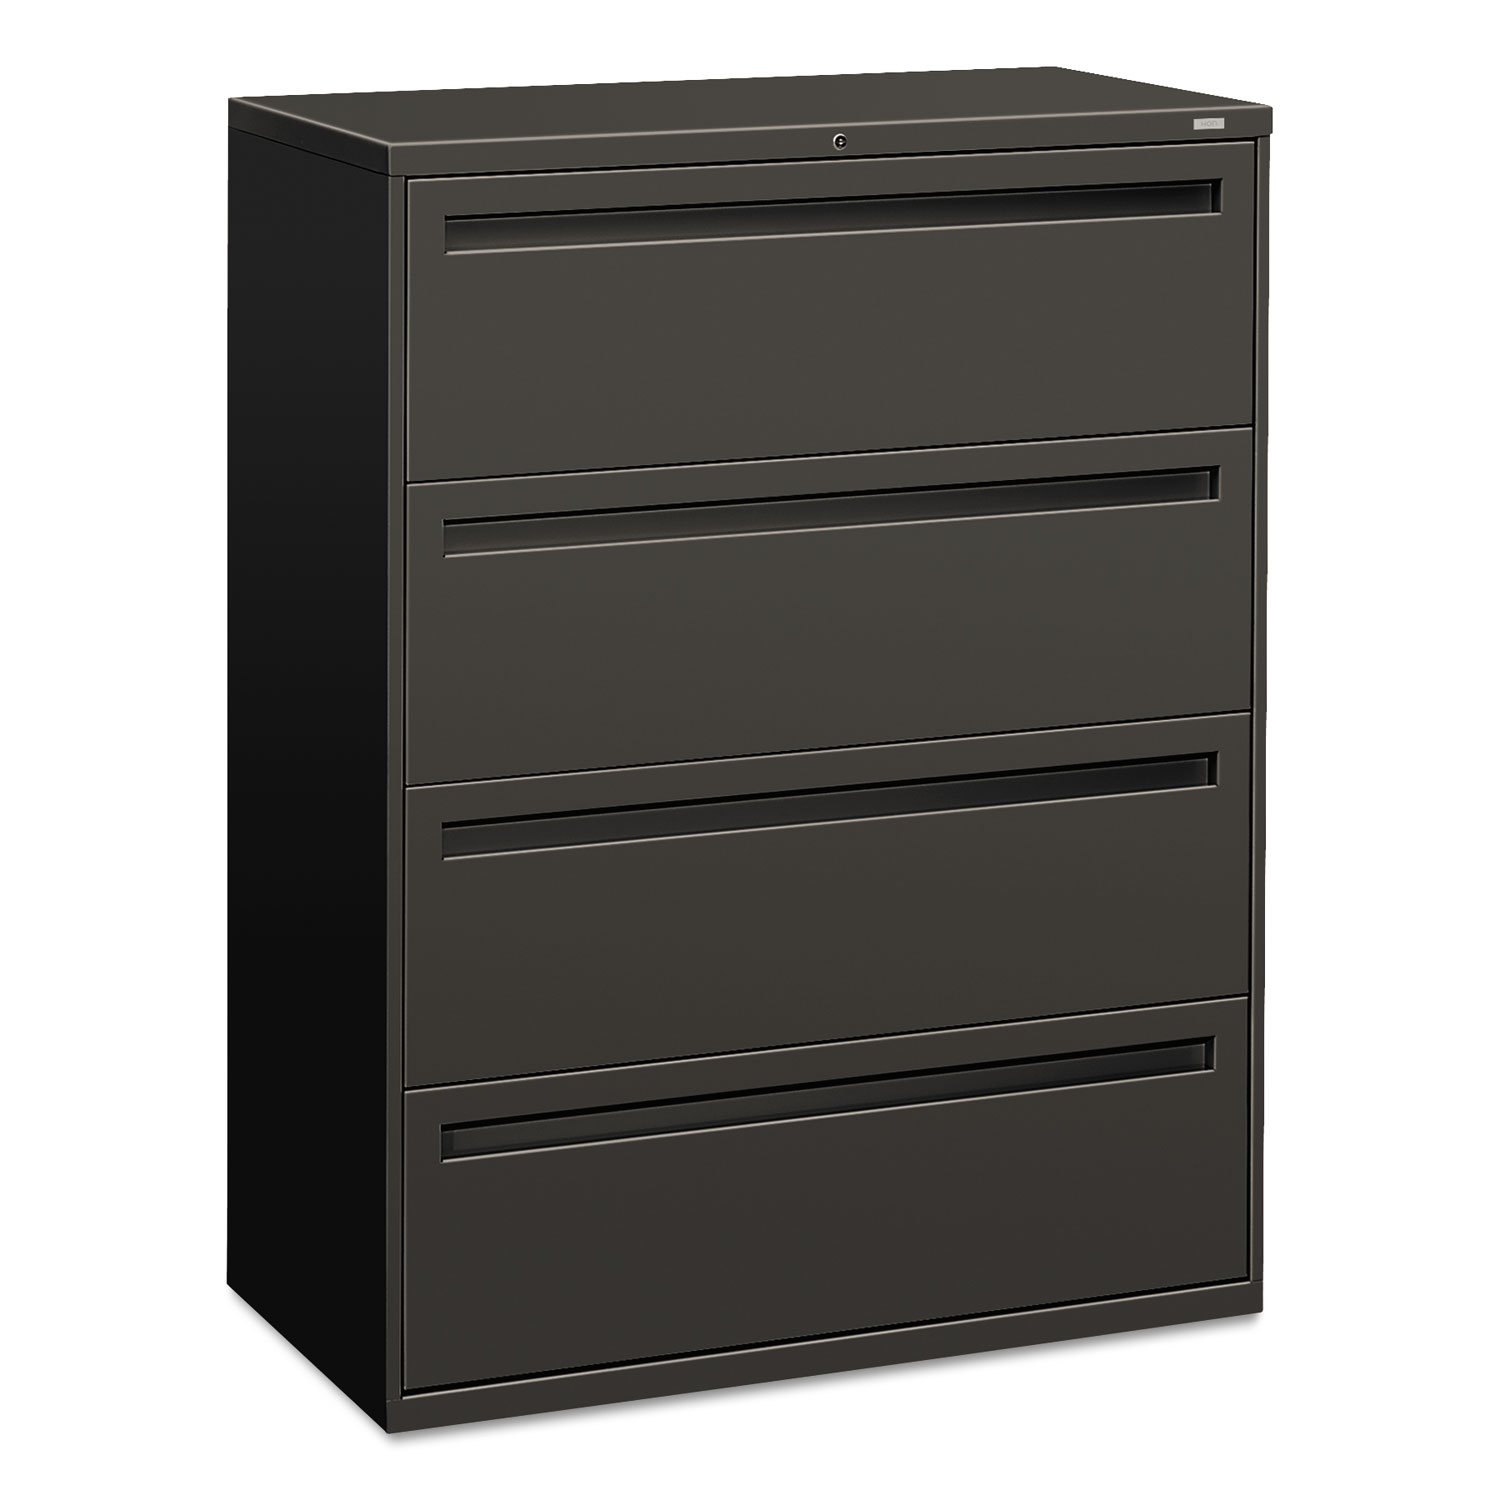 700 Series Four-Drawer Lateral File, 42w x 18d x 52 1/2h, Charcoal